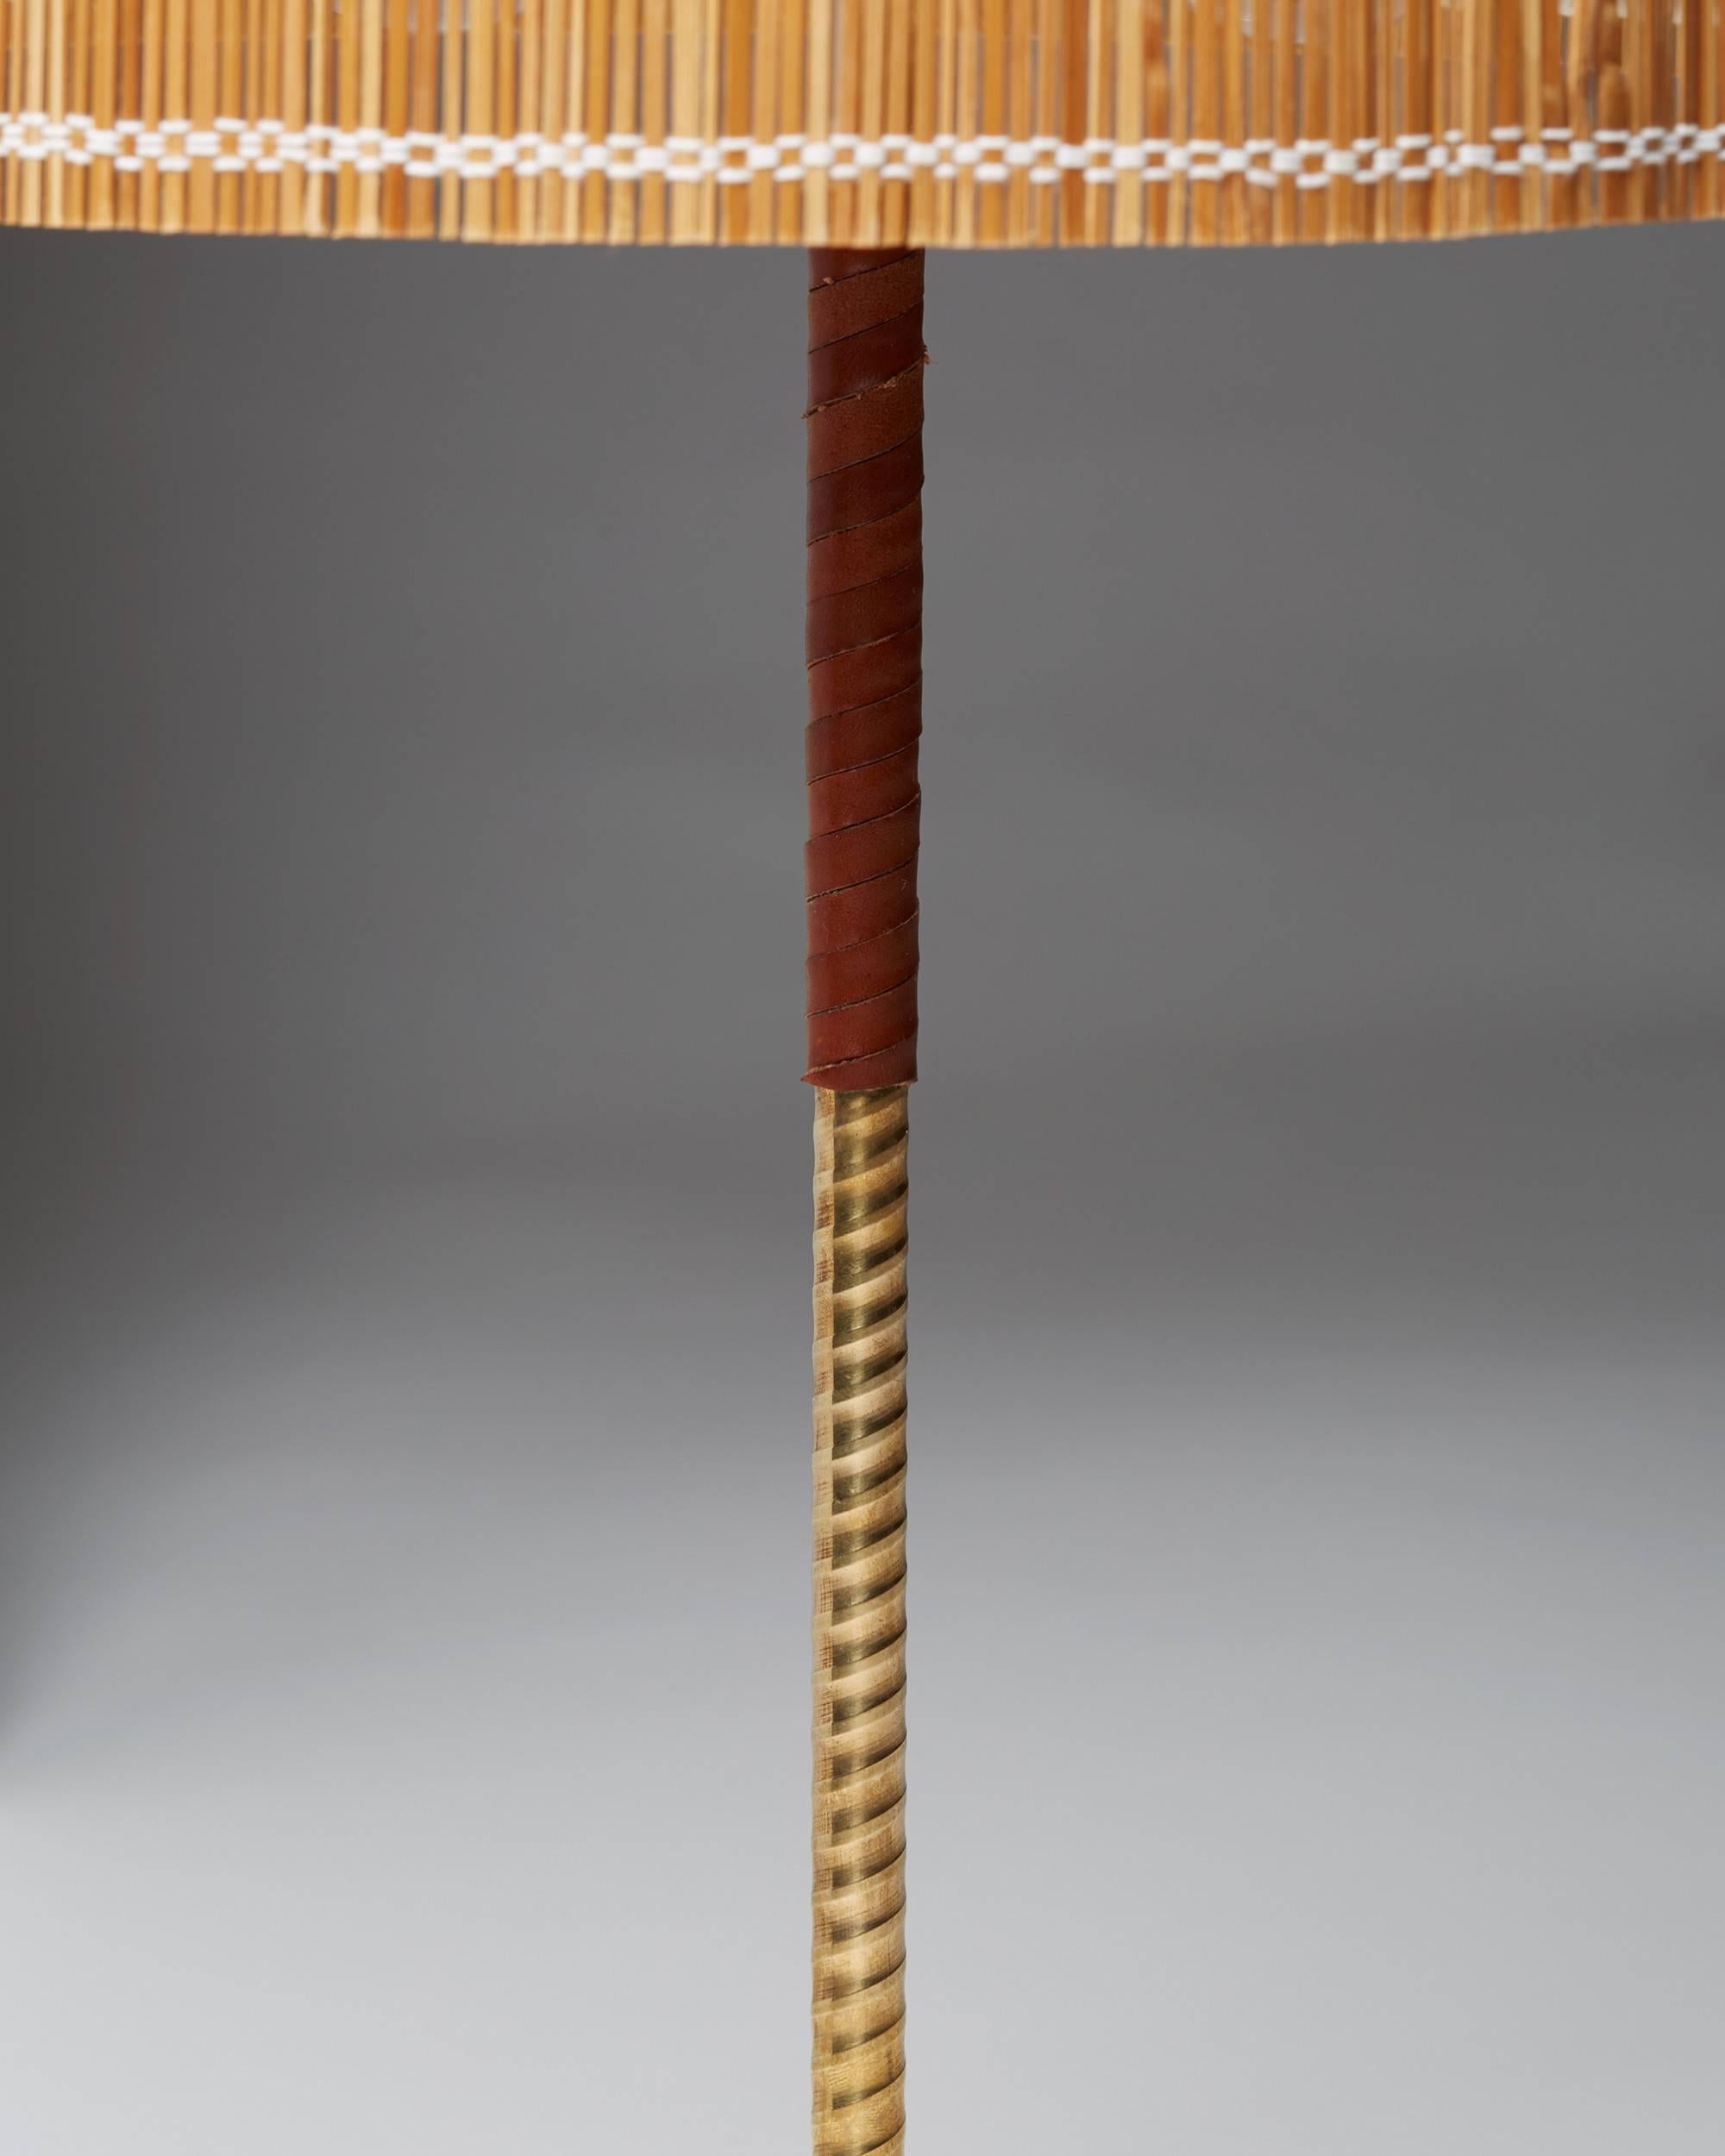 Table lamp 9205 designed by Paavo Tynell for Taito Oy, Finland, 1950s.
Brass, leather and cane.
     